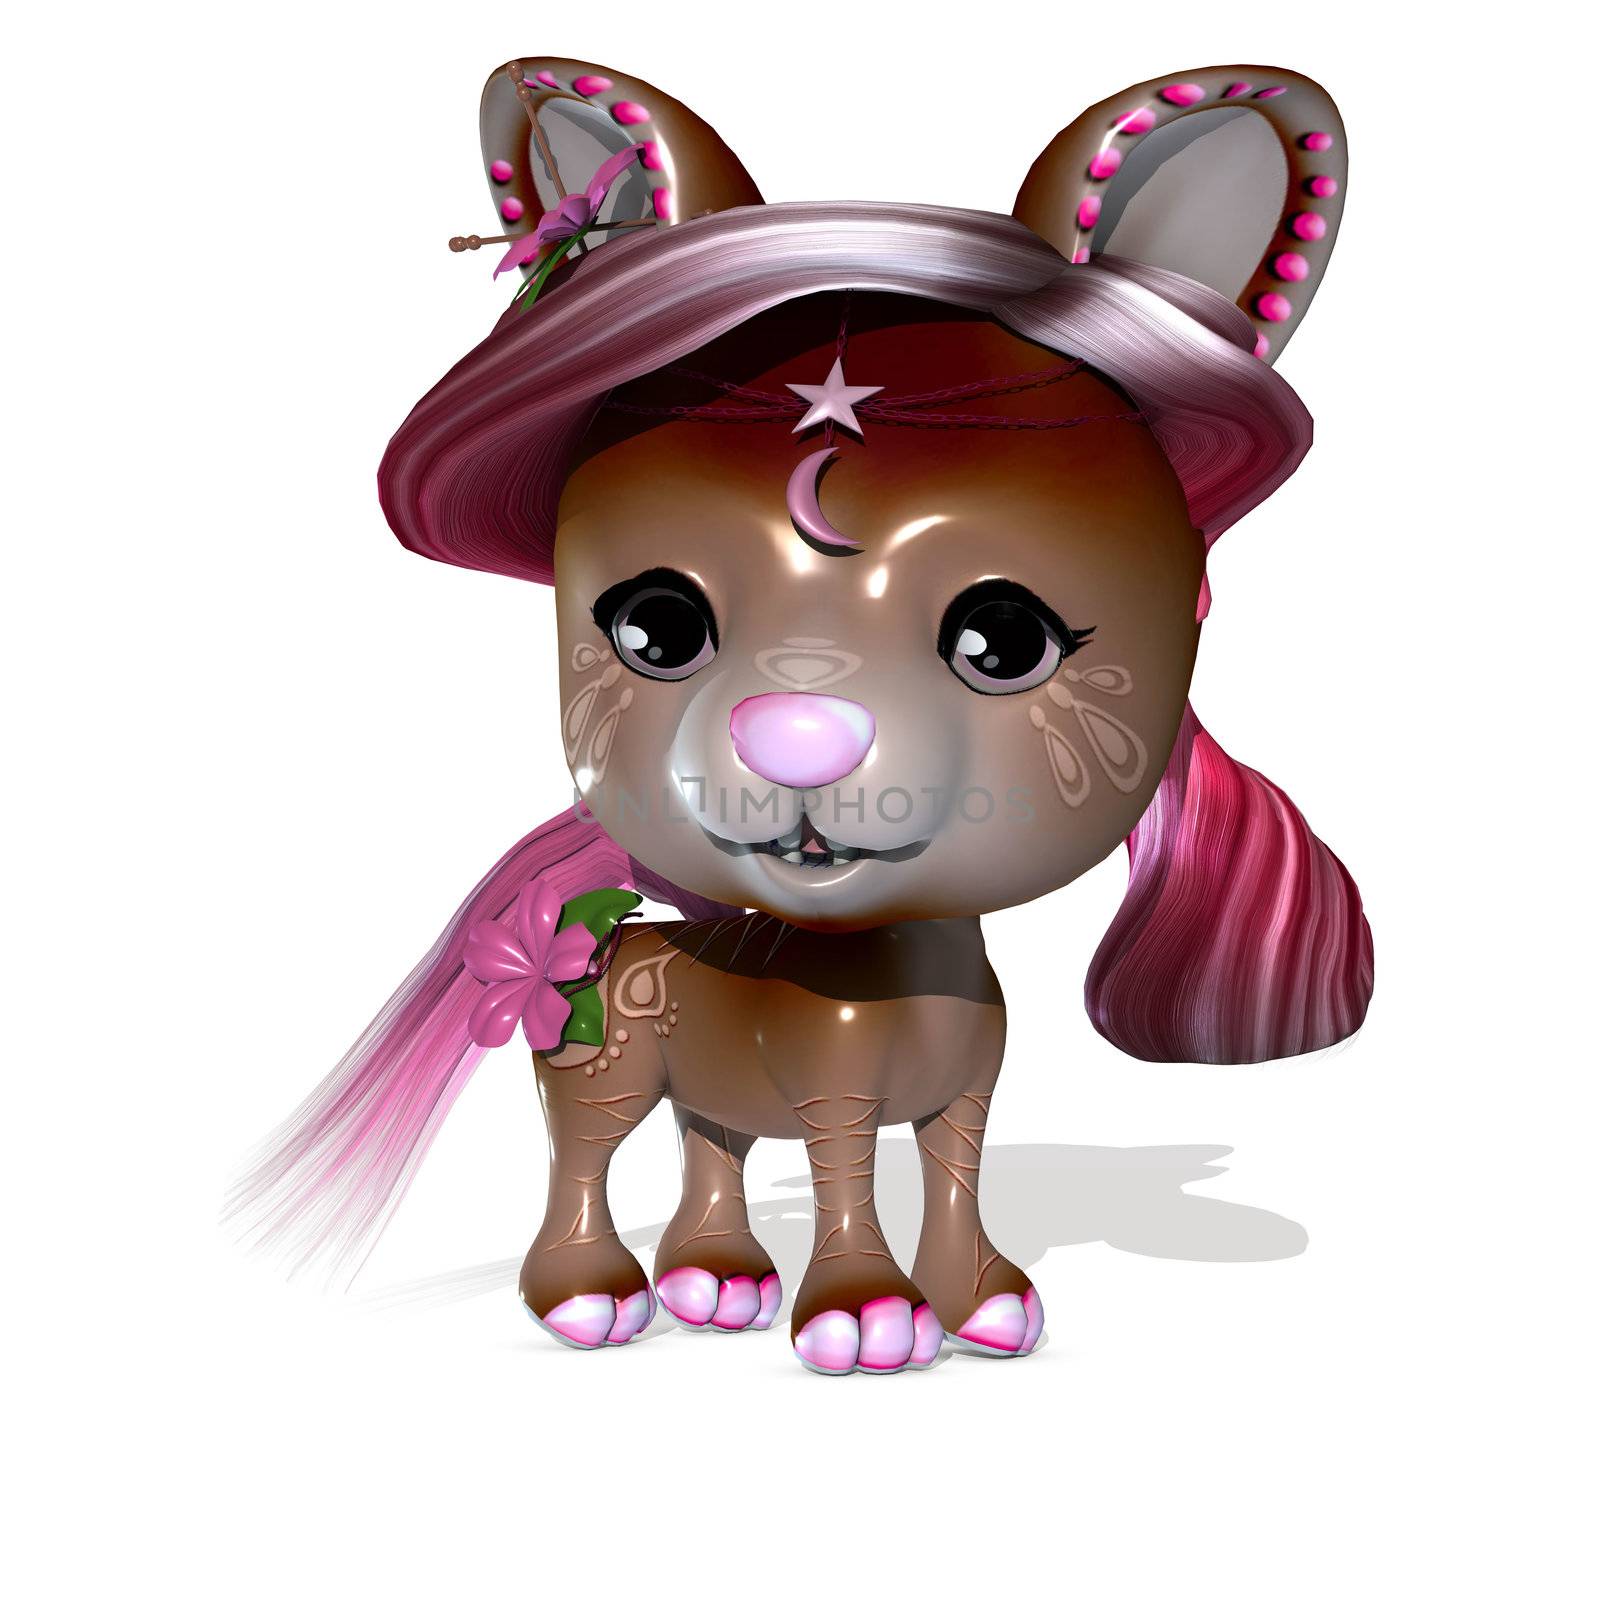 3D Rendered cute fantasy pet by 3volve